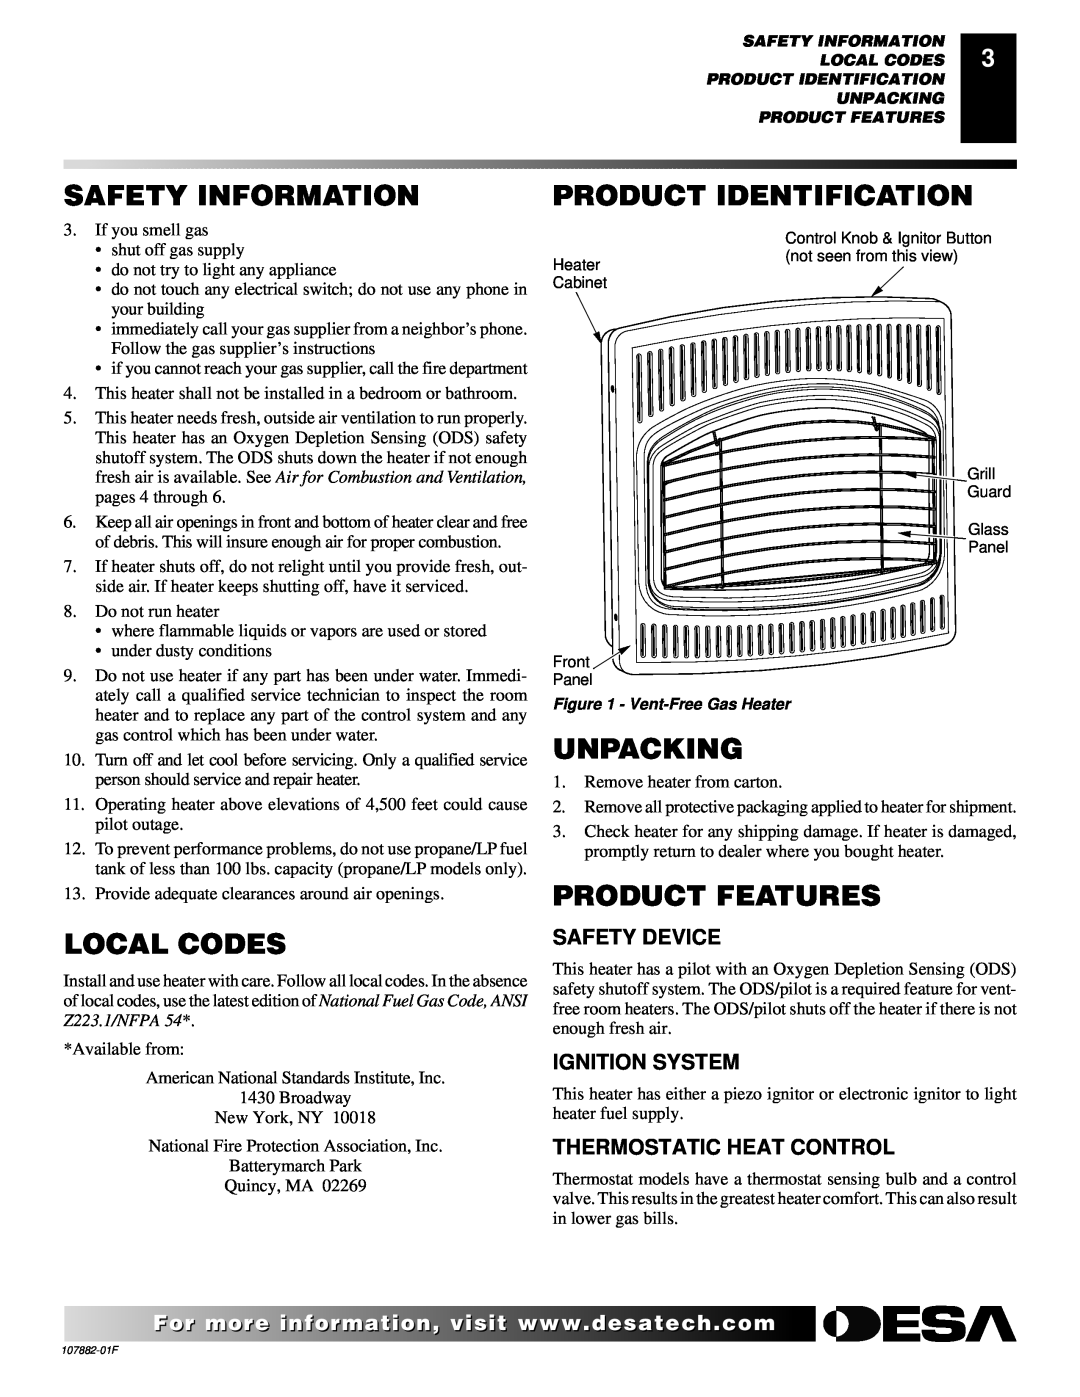 Desa CBN20 installation manual Product Identification, Local Codes, Unpacking, Product Features, Safety Information 